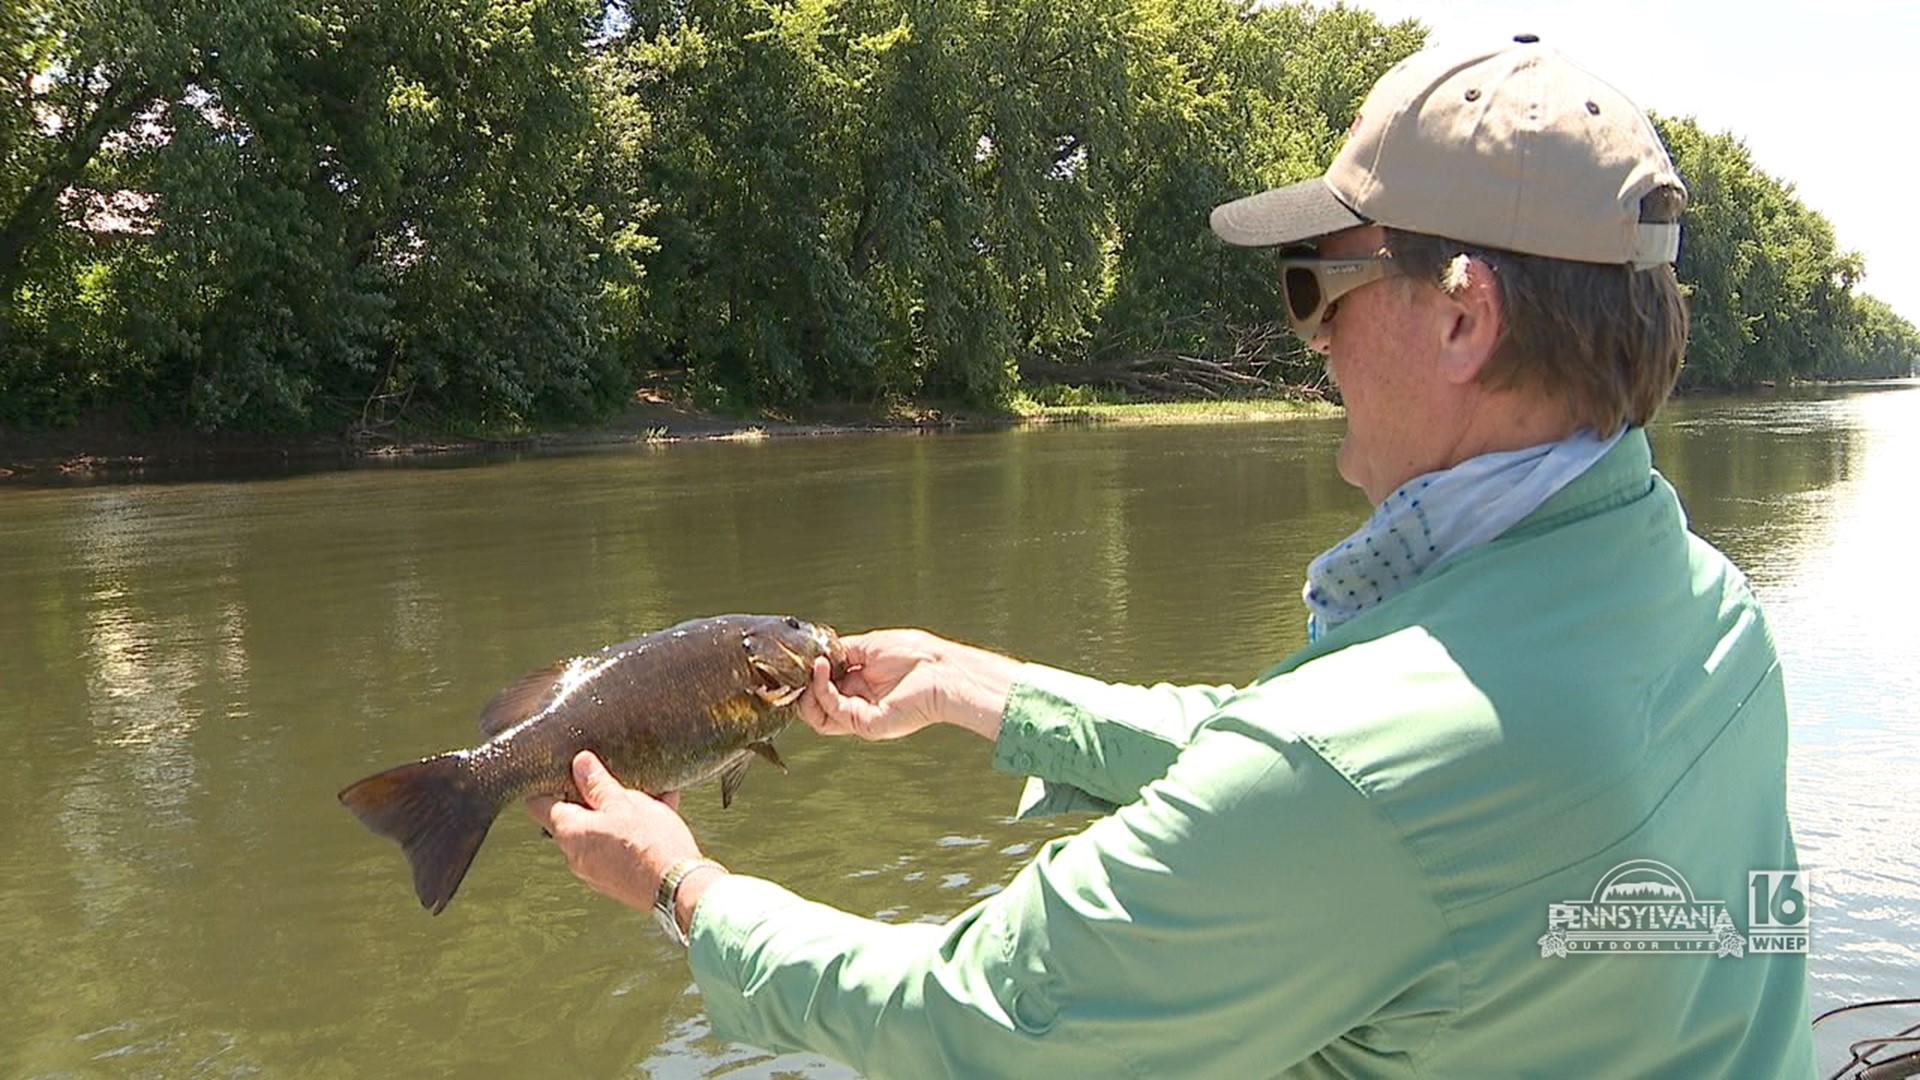 Catching Susquehanna Smallmouth bass with locally made baits.